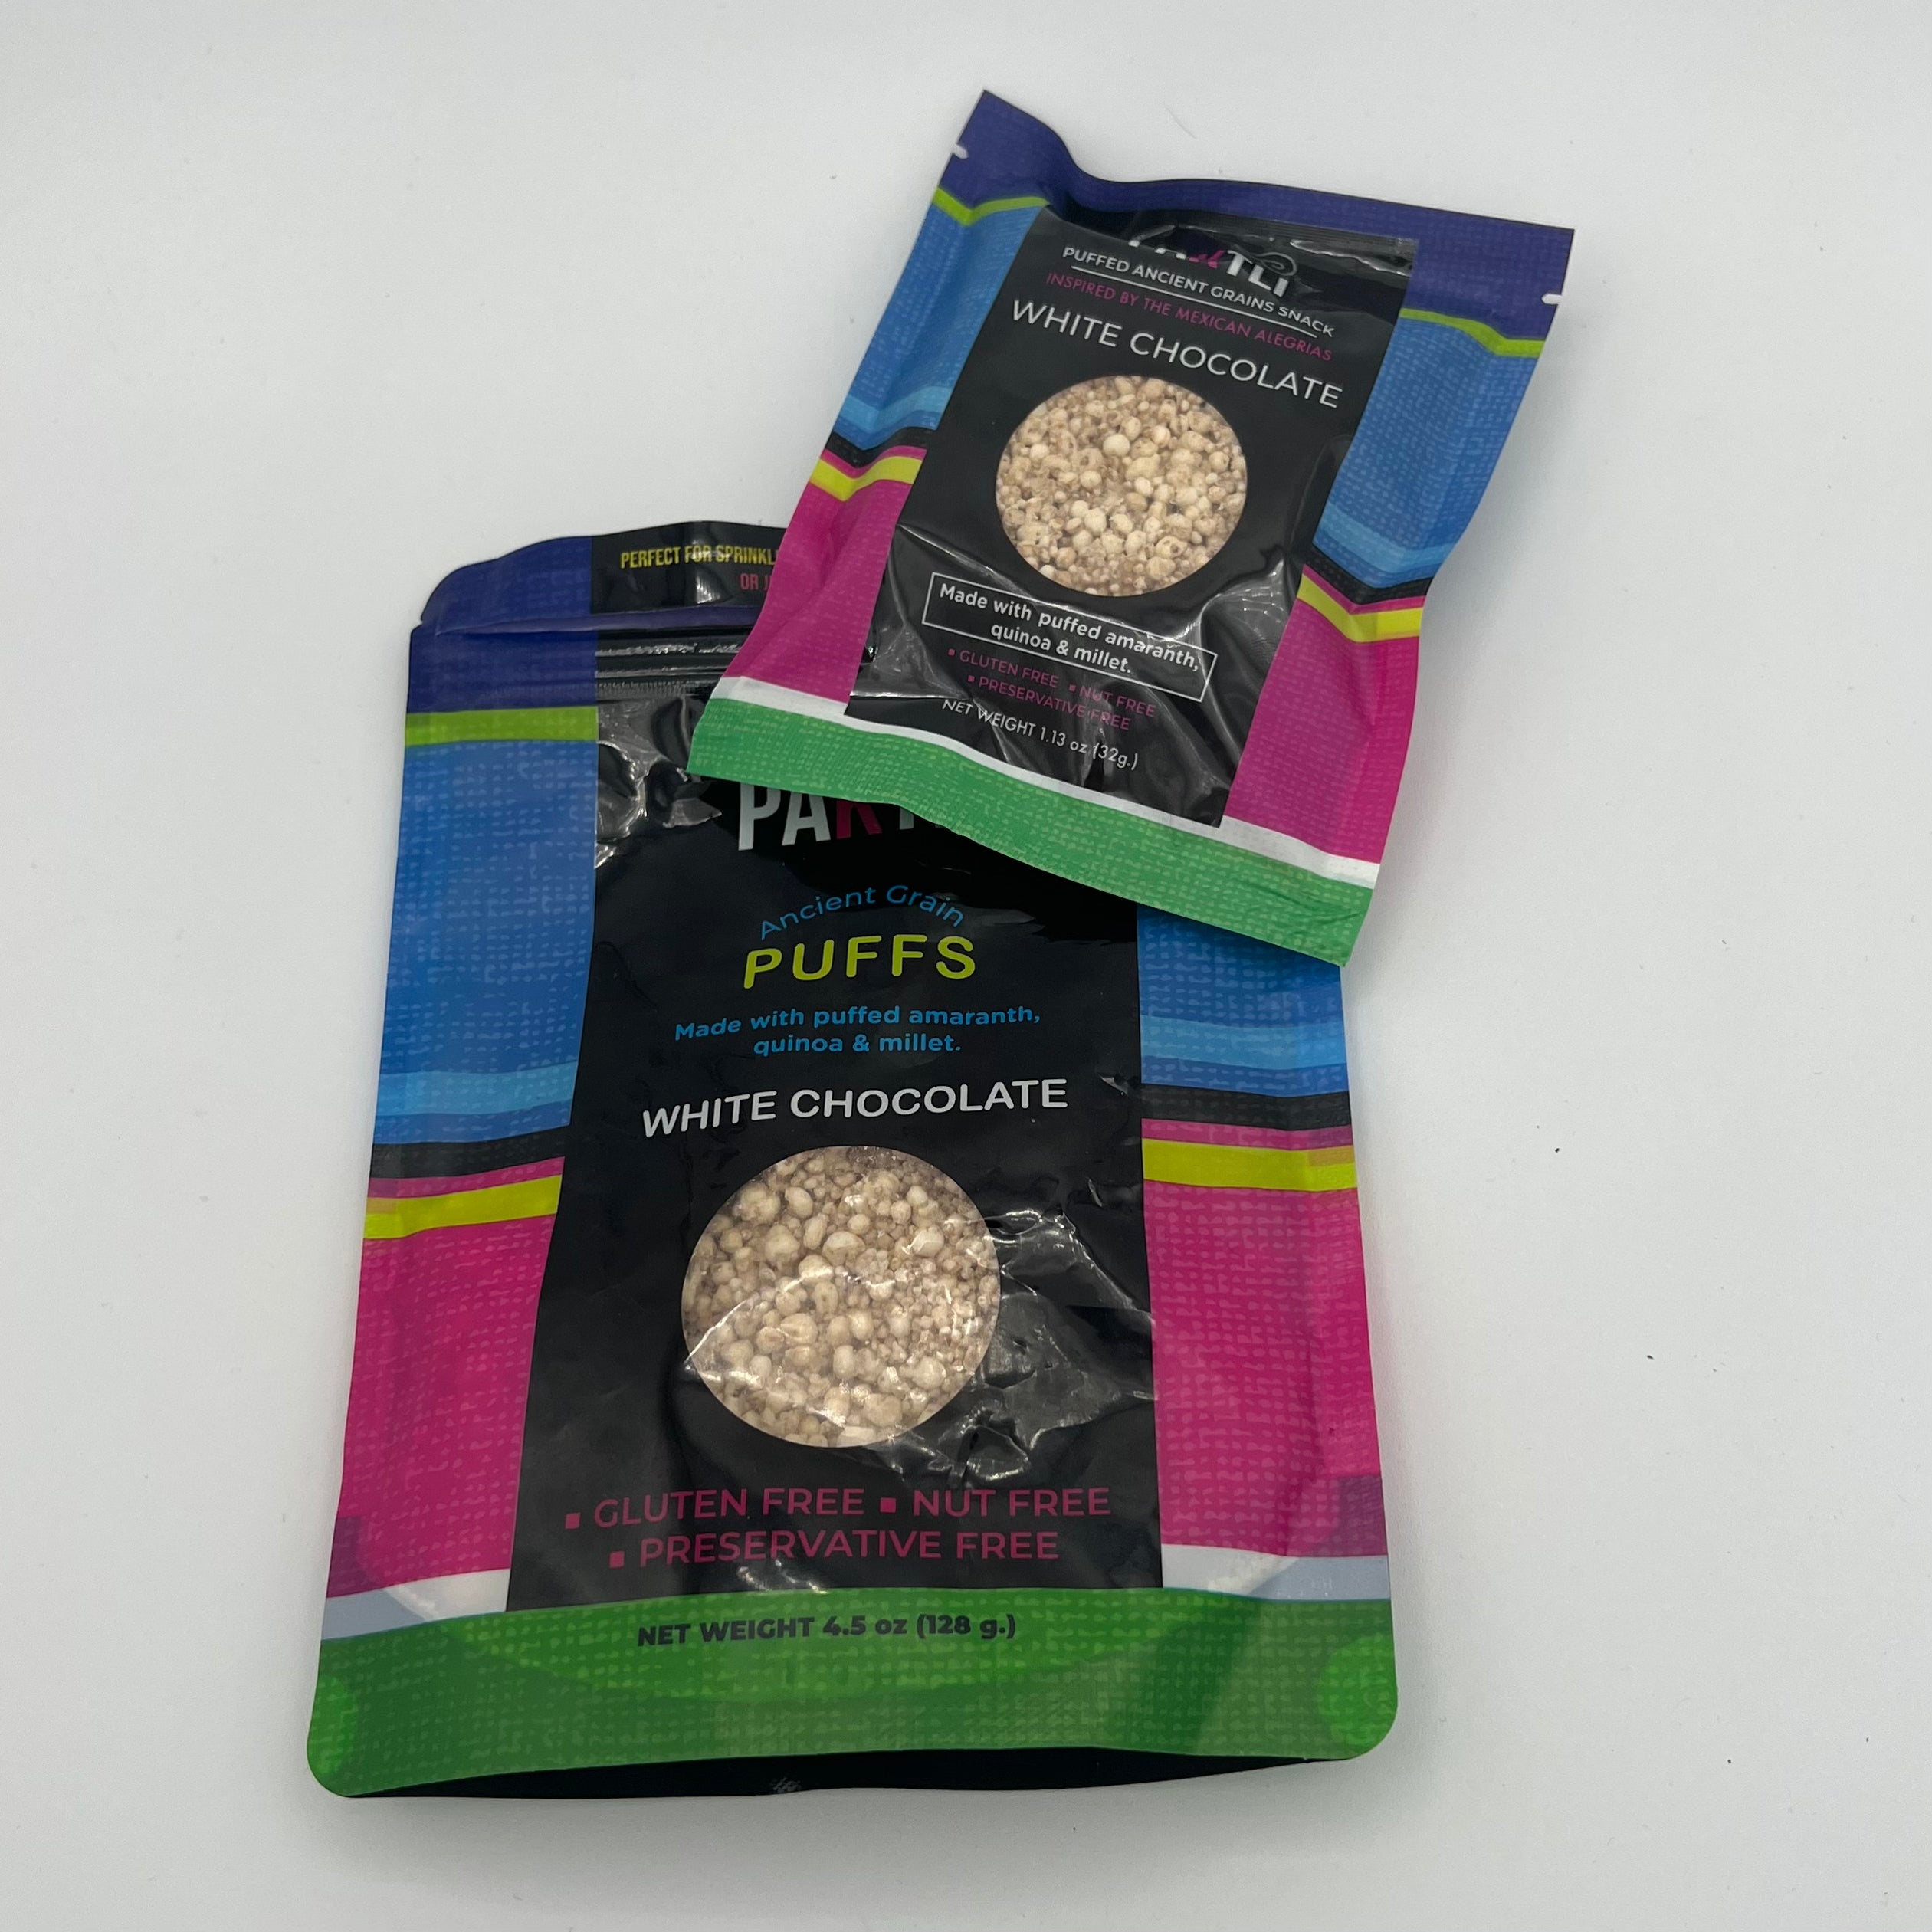 PAKTLI Puffed Ancient Grain White Chocolate Snack Cakes and Puffs